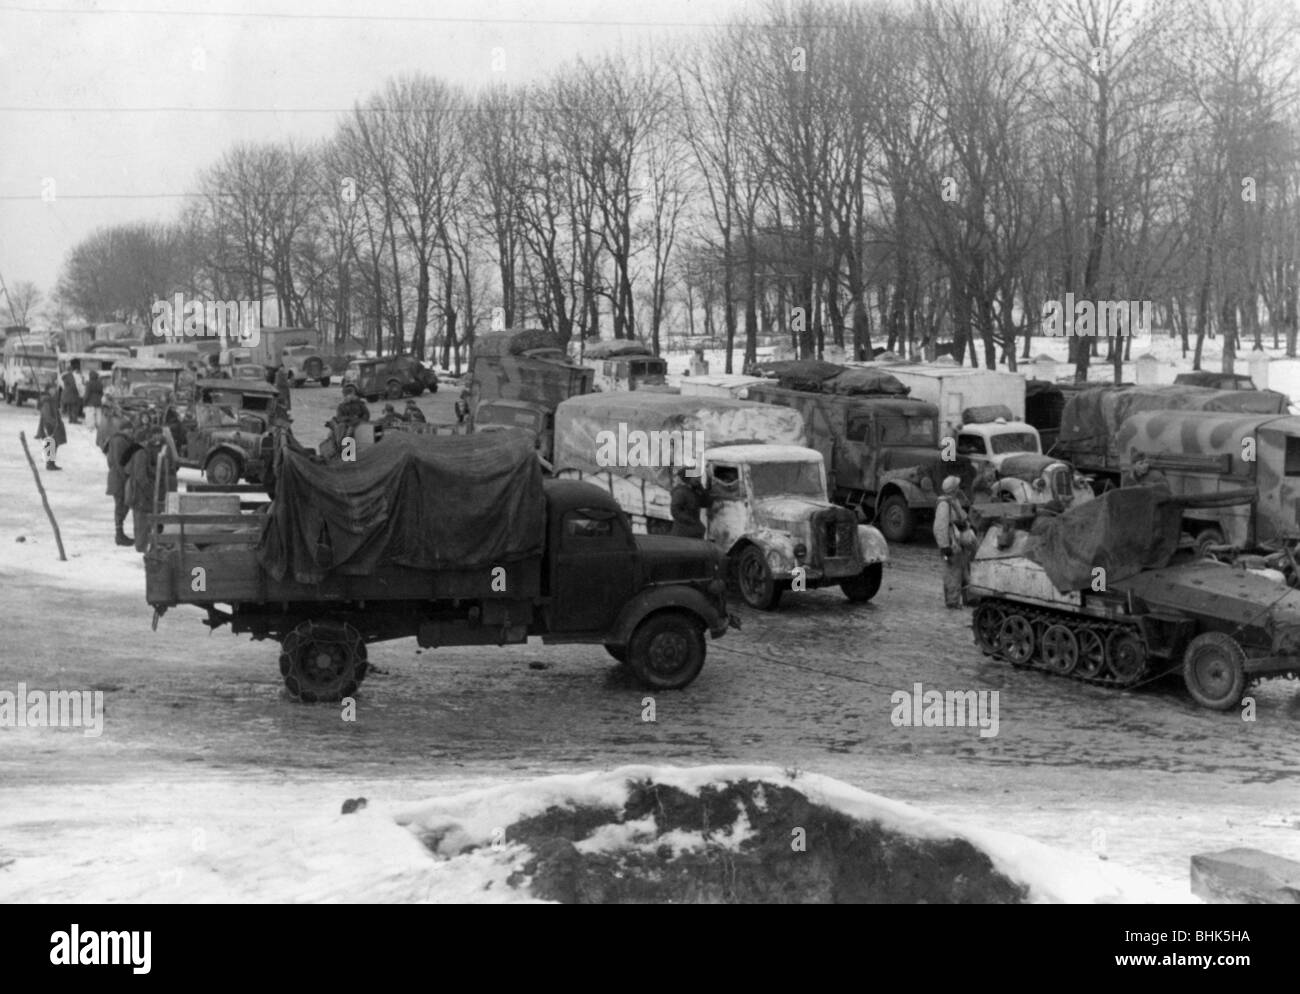 WW2 Photo German Half-Tracks on the Eastern Front WWII World War Two Russia